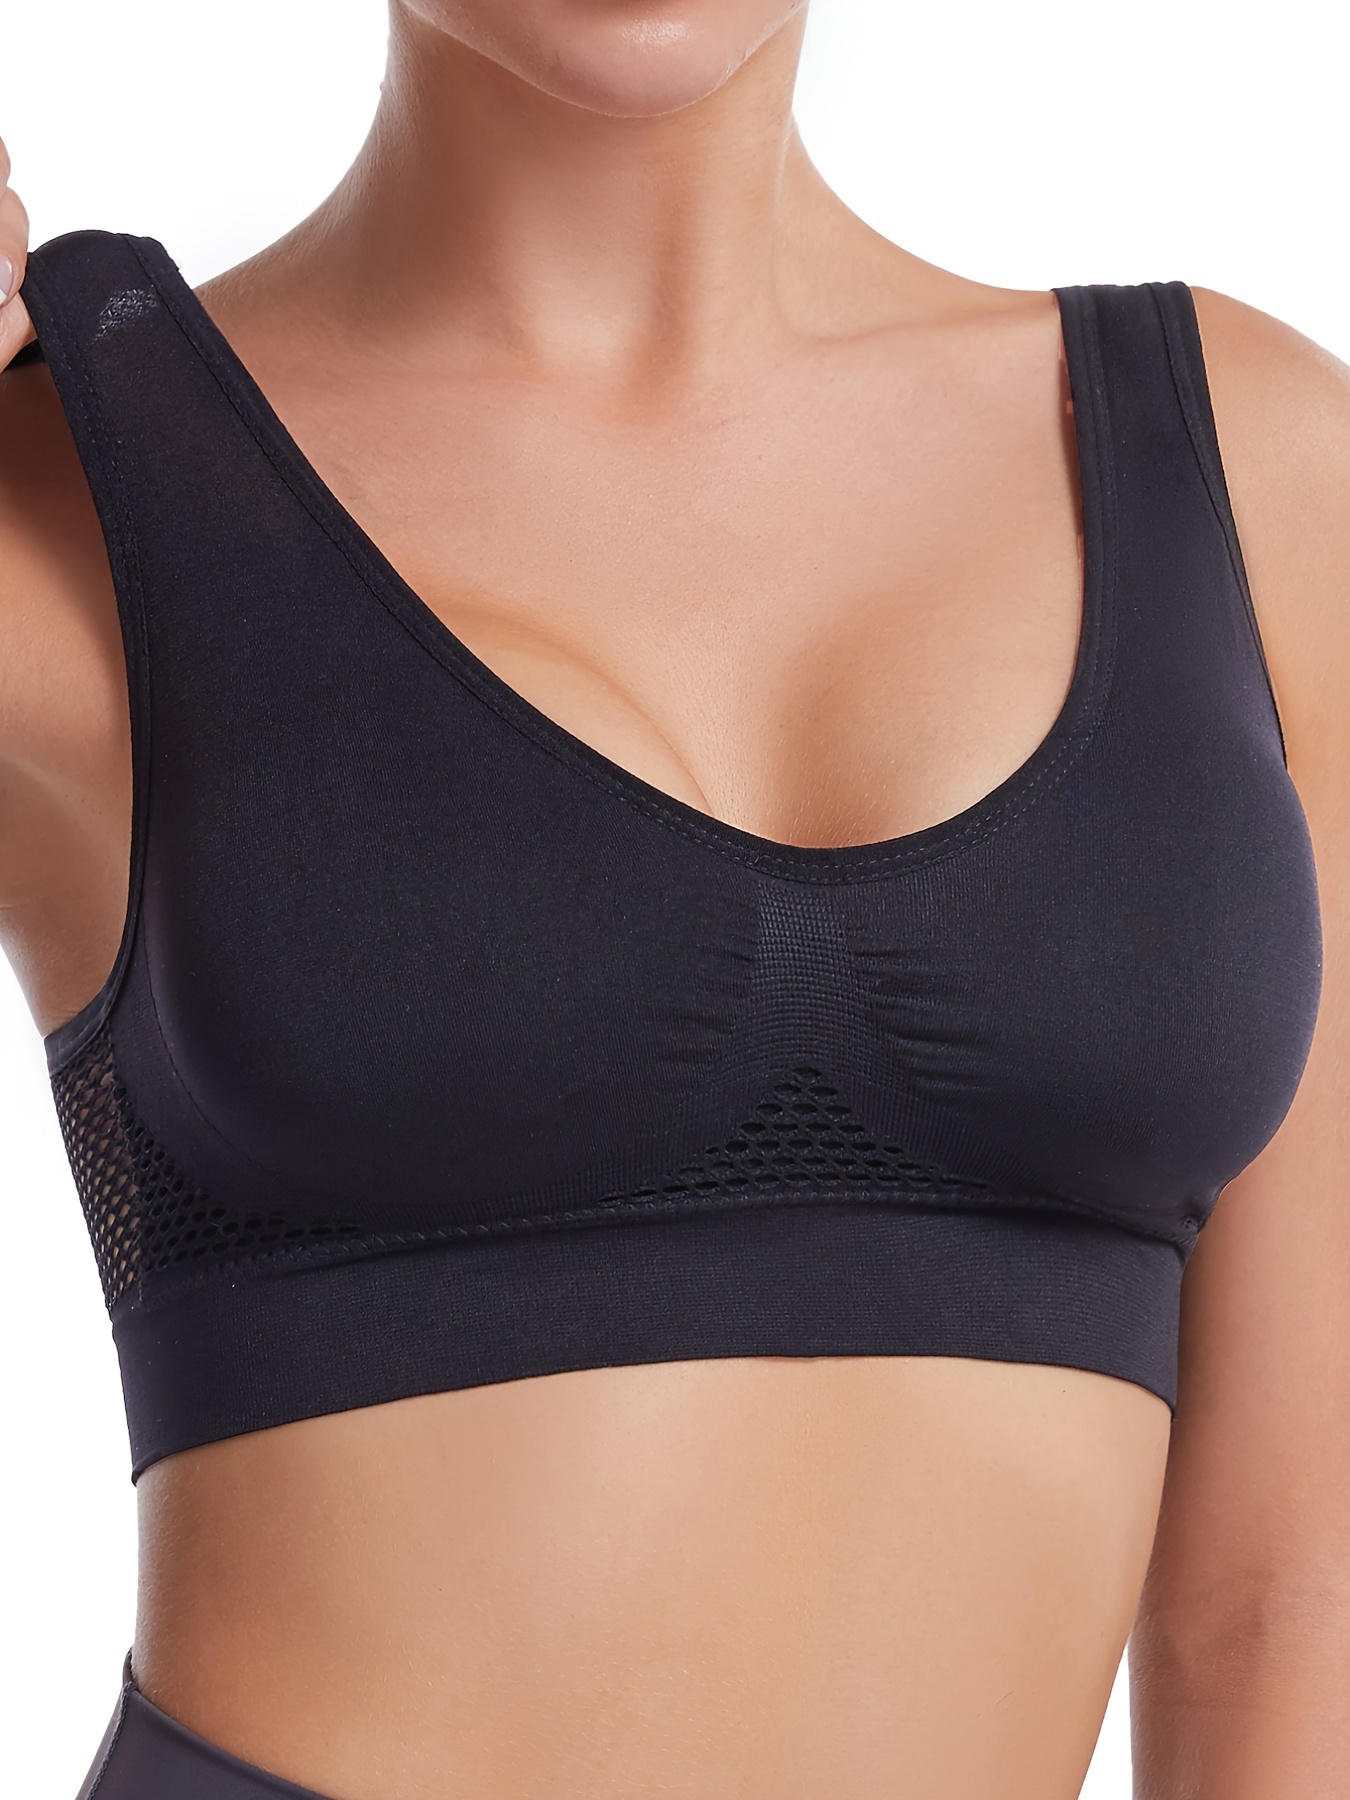 Lingerie Sports Bras for Women Seamless Comfortable Yoga Bra with